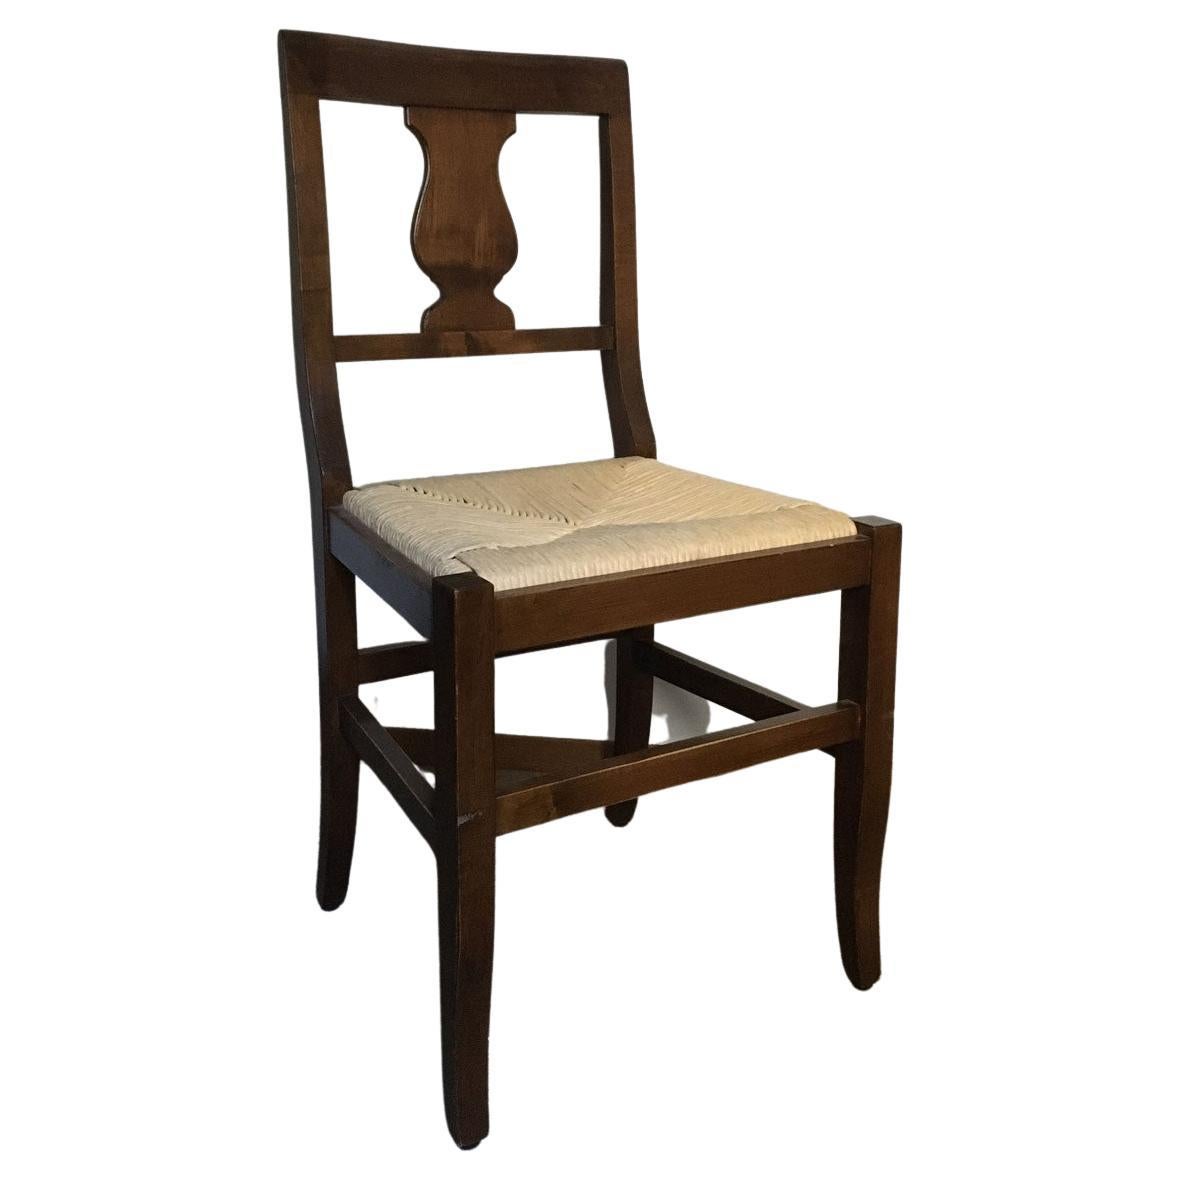 This Italian set of 6 charming chairs are made in solid nutwood. The seat is hand made in natural raffia, with its natural color.
This kind of chairs has a shape originally from the past, this model inspired the Italian craftmenship when made this